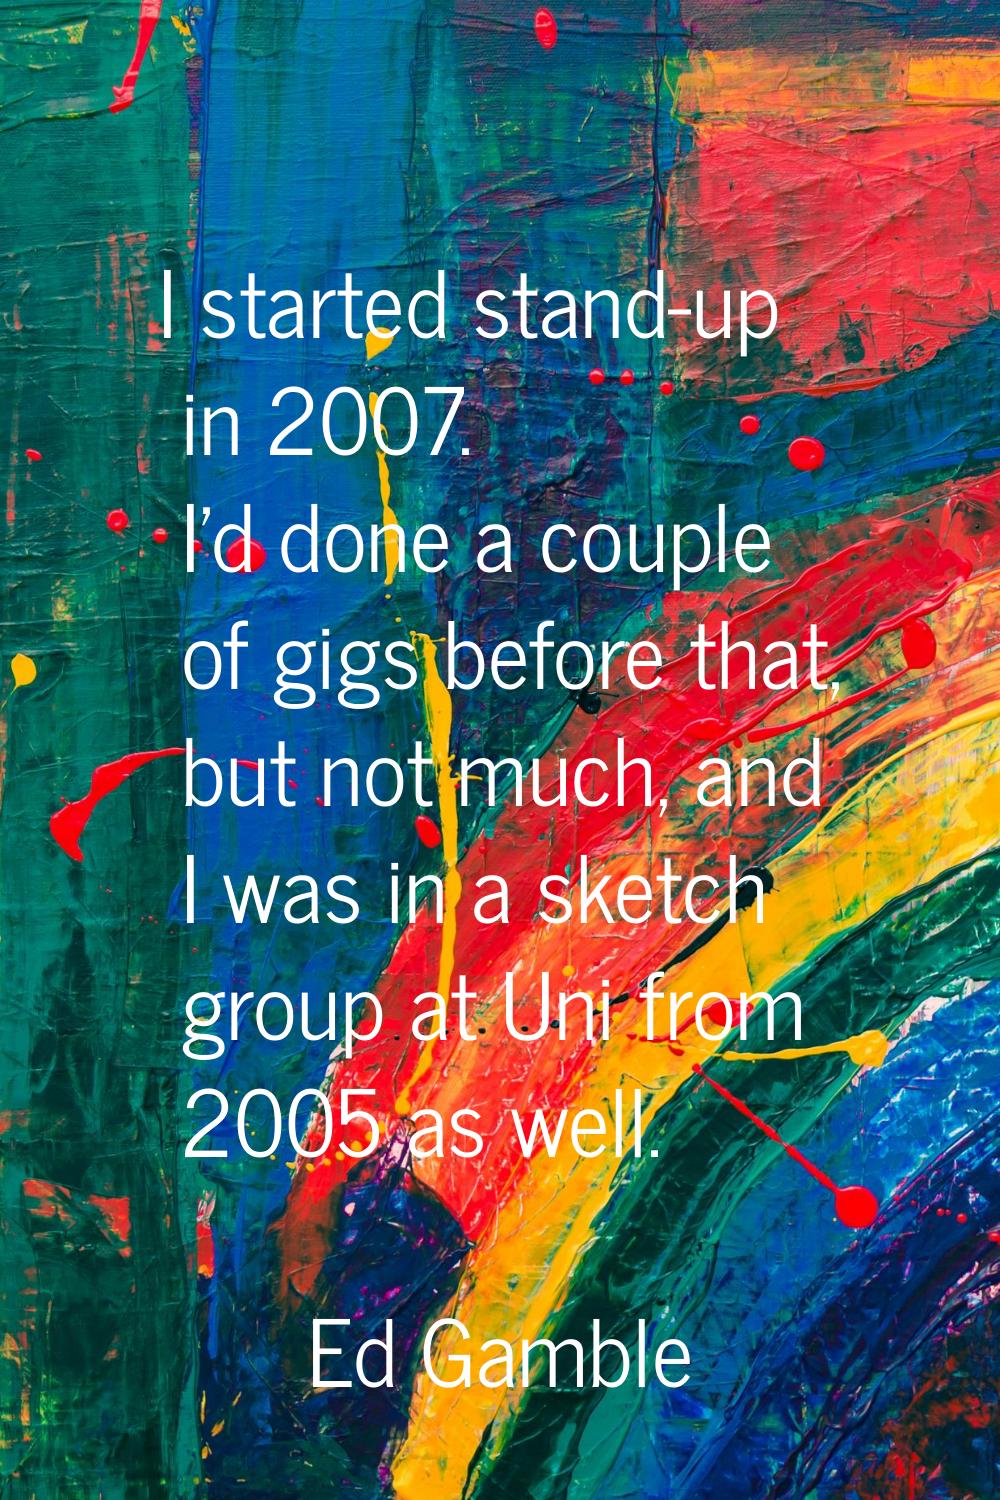 I started stand-up in 2007. I'd done a couple of gigs before that, but not much, and I was in a ske